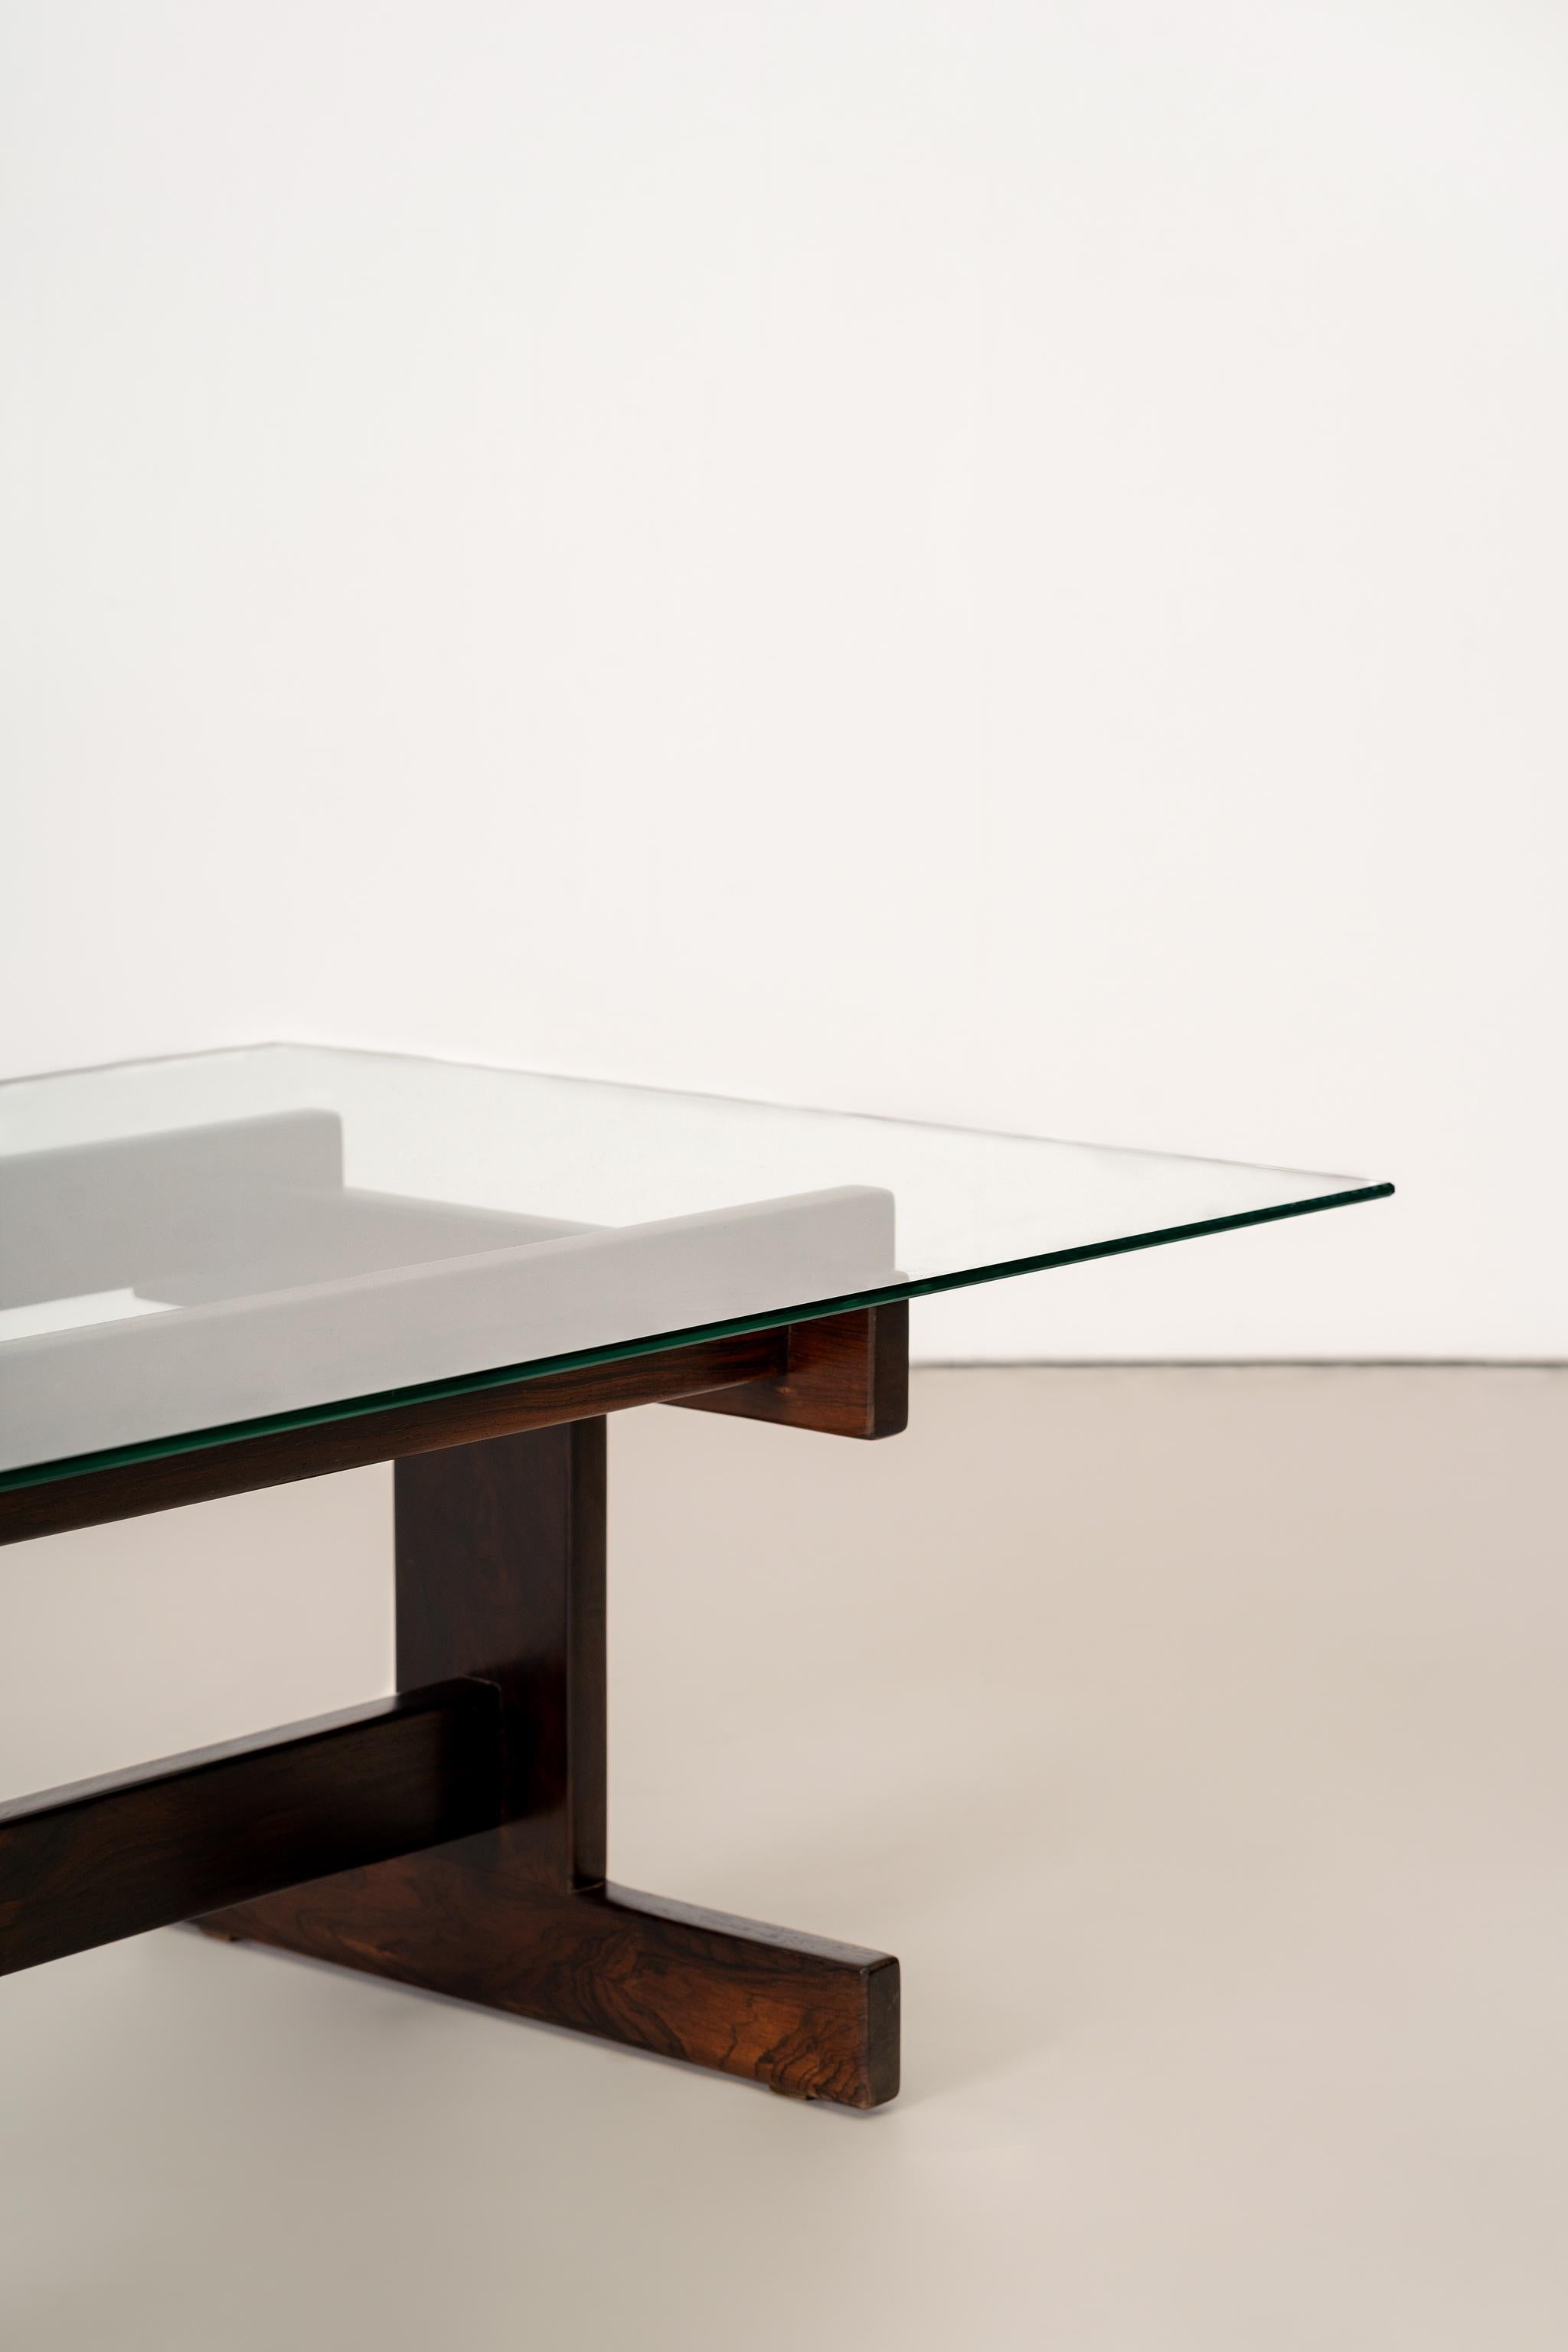 20th Century Brazilian Midcentury Center Table in Rosewood and Glass, c. 1970 For Sale